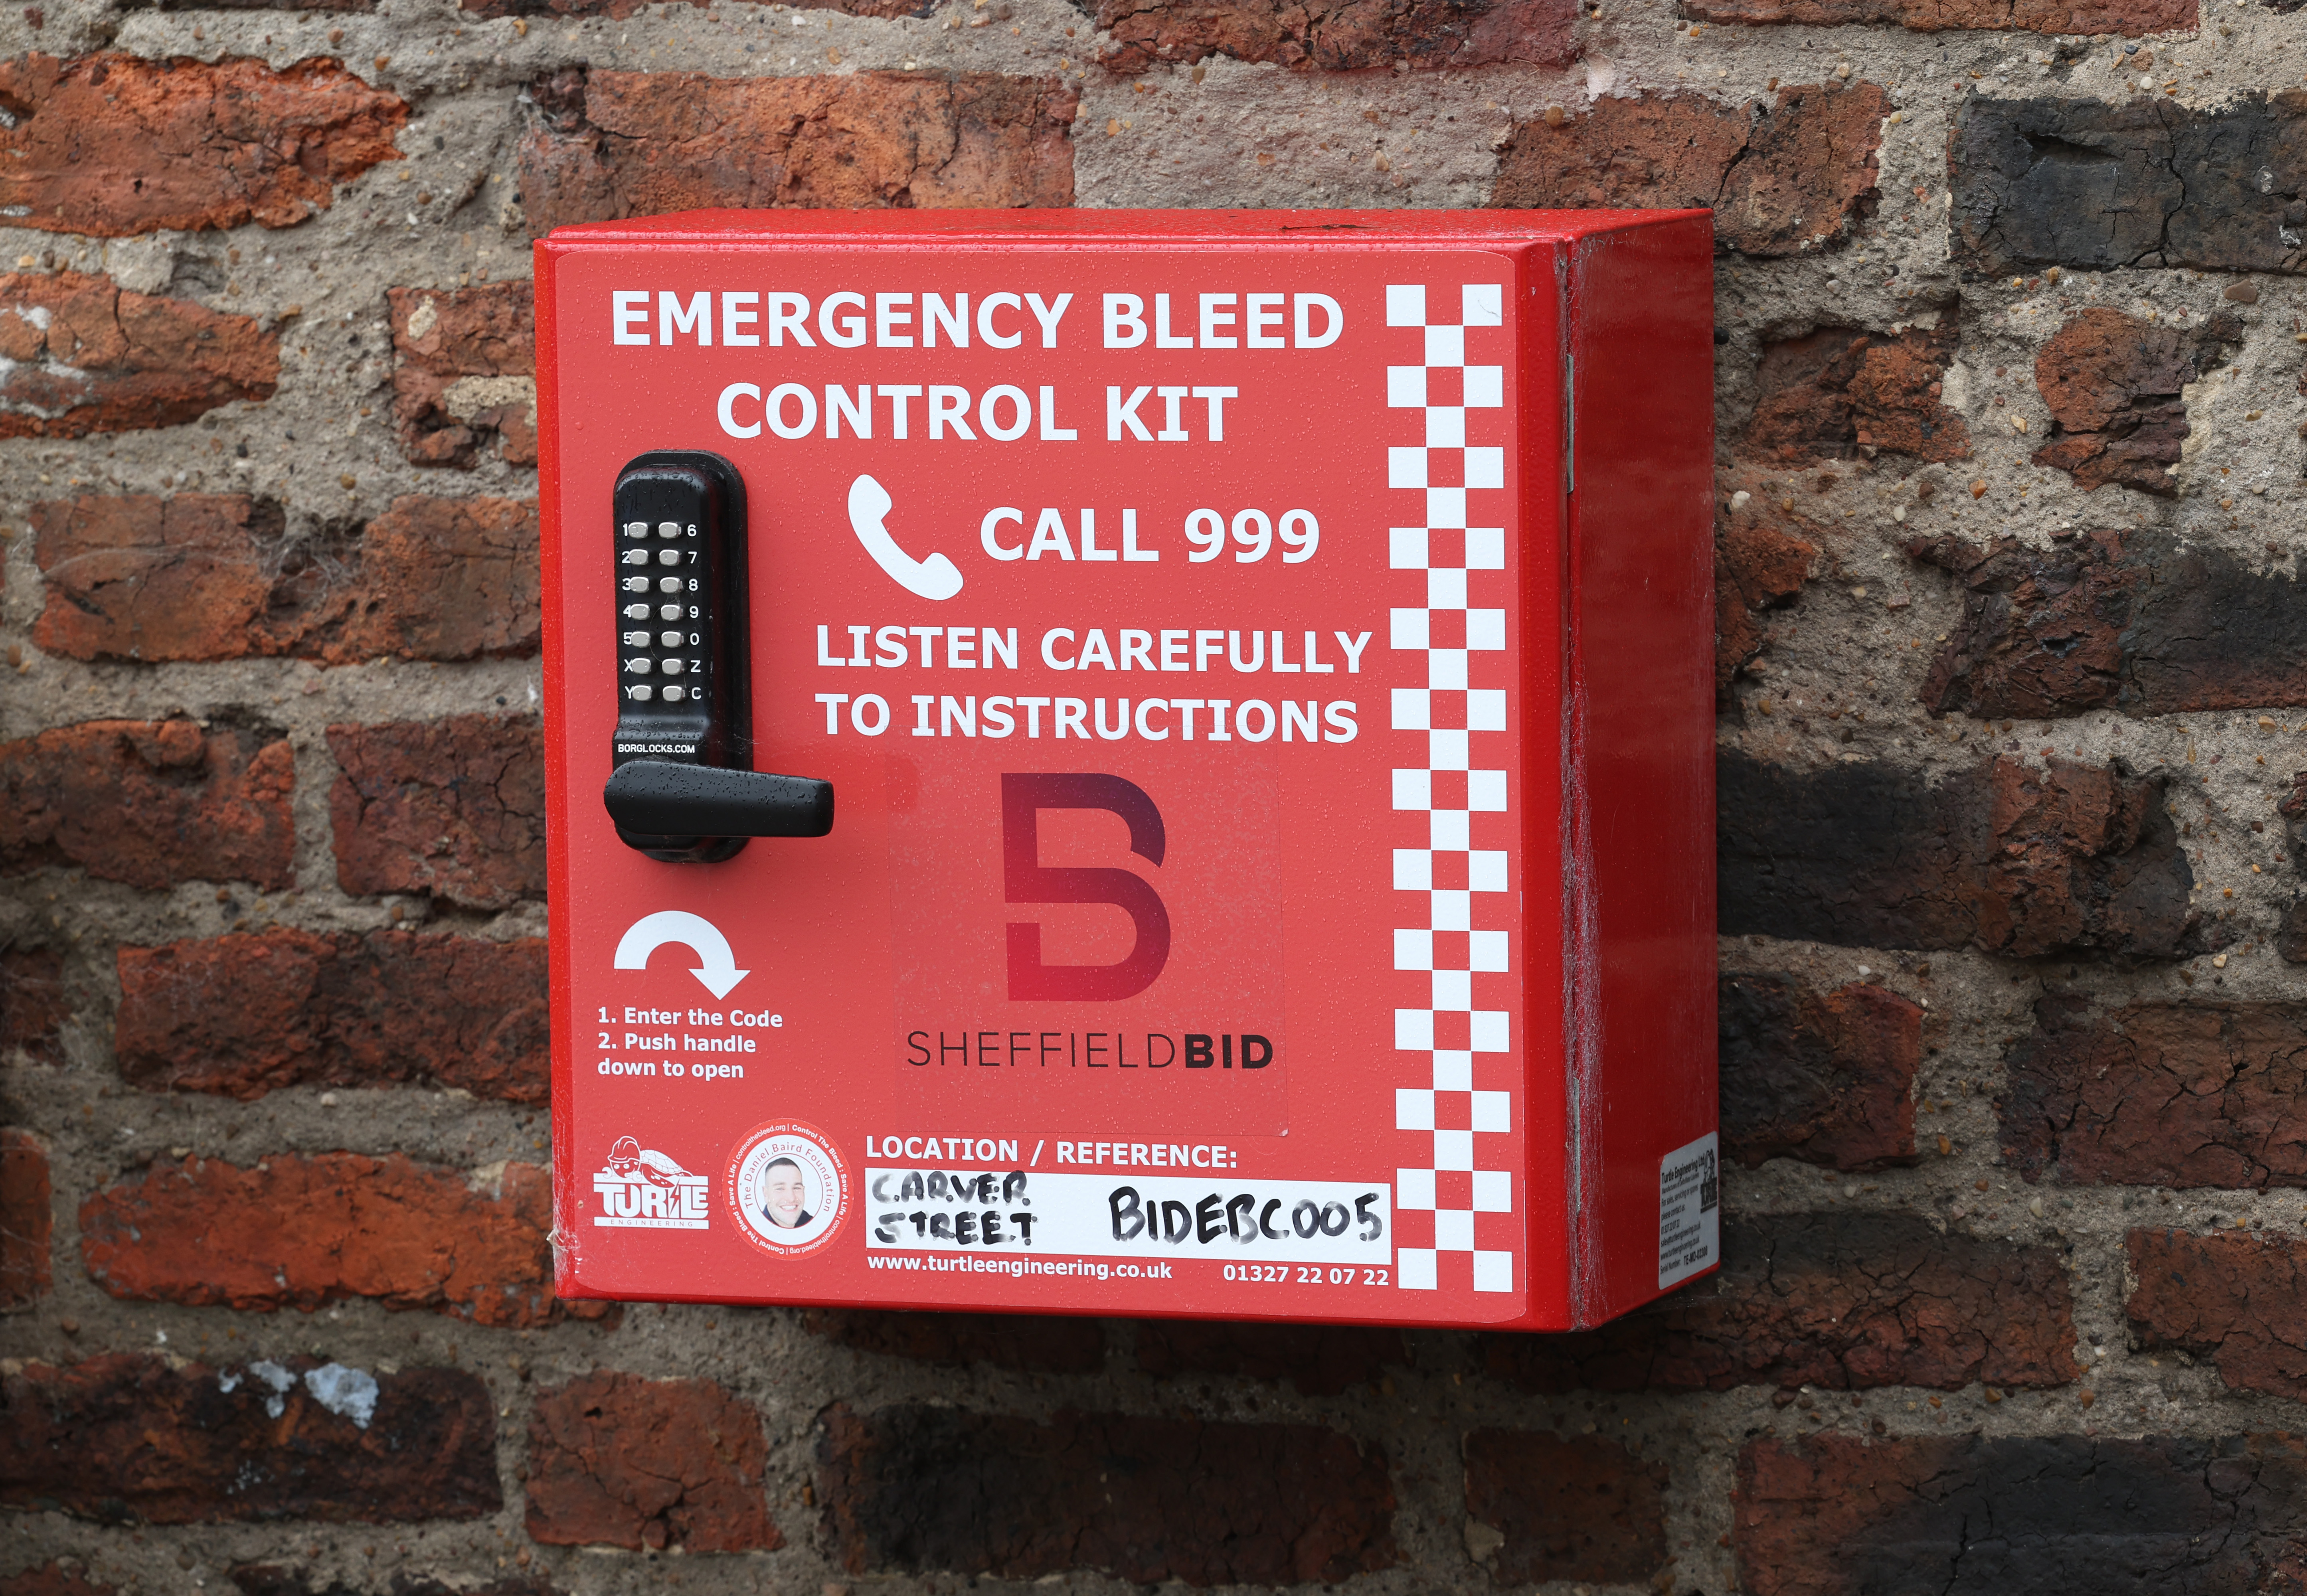 The escalating violence has seen 'bleed kits' installed on the street